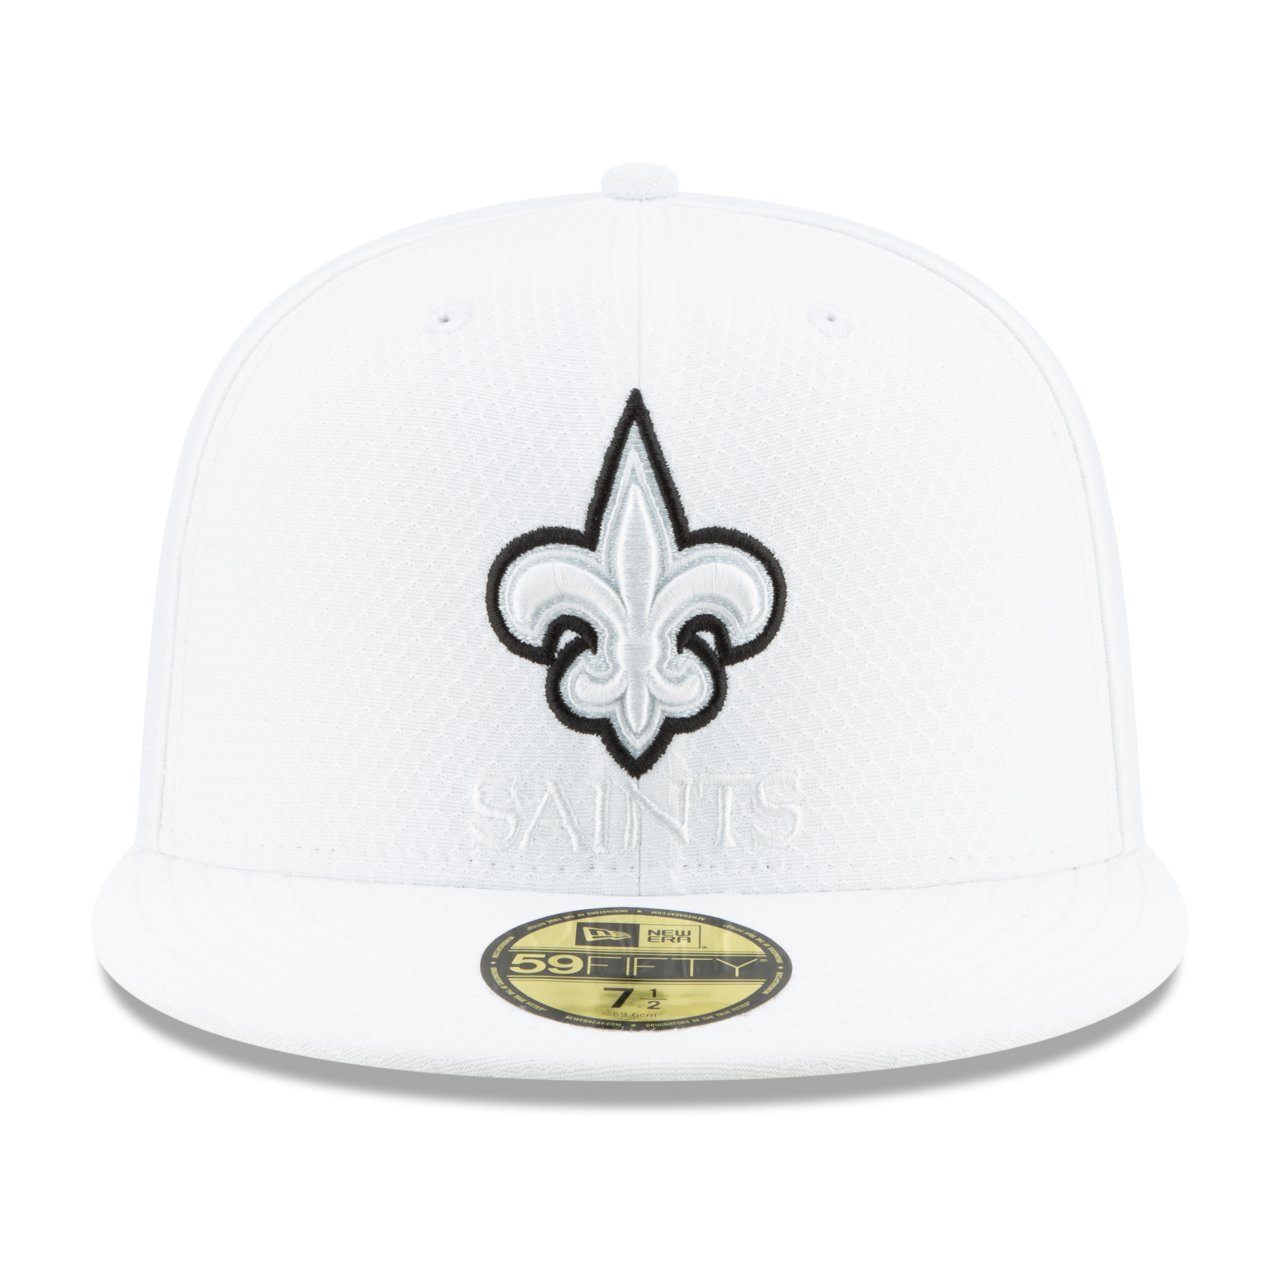 Sideline Era Orleans New Fitted PLATINUM NFL Cap New Saints 59Fifty